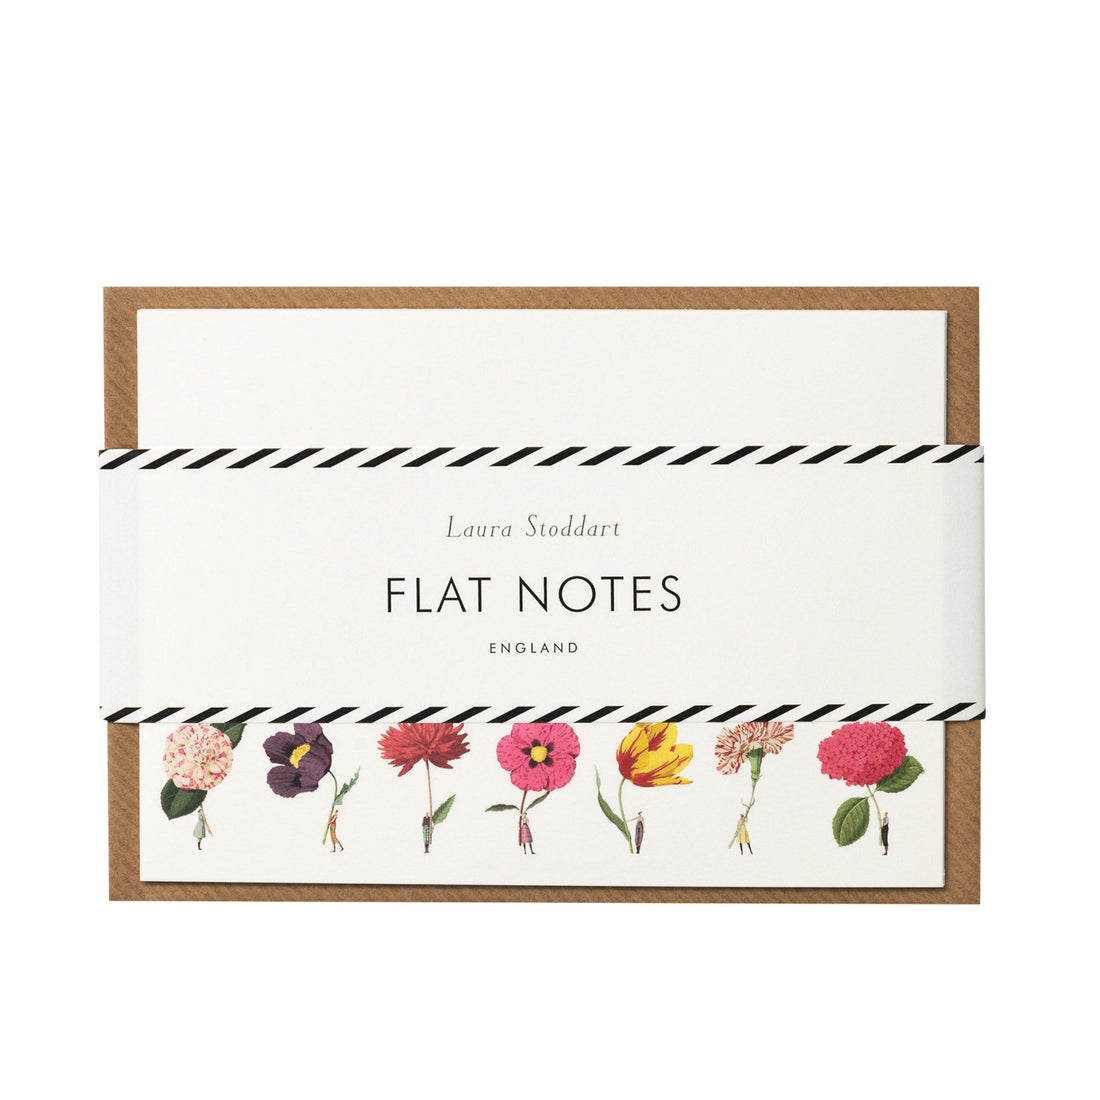 In Bloom Multi Colored Flowers Flat Notes - Hester &amp; Cook offers a beautiful selection of easy-to-use flat notes featuring multi colored flowers. With the exquisite designs by Laura Stoddart, these flat notes are perfect for any occasion or personal.